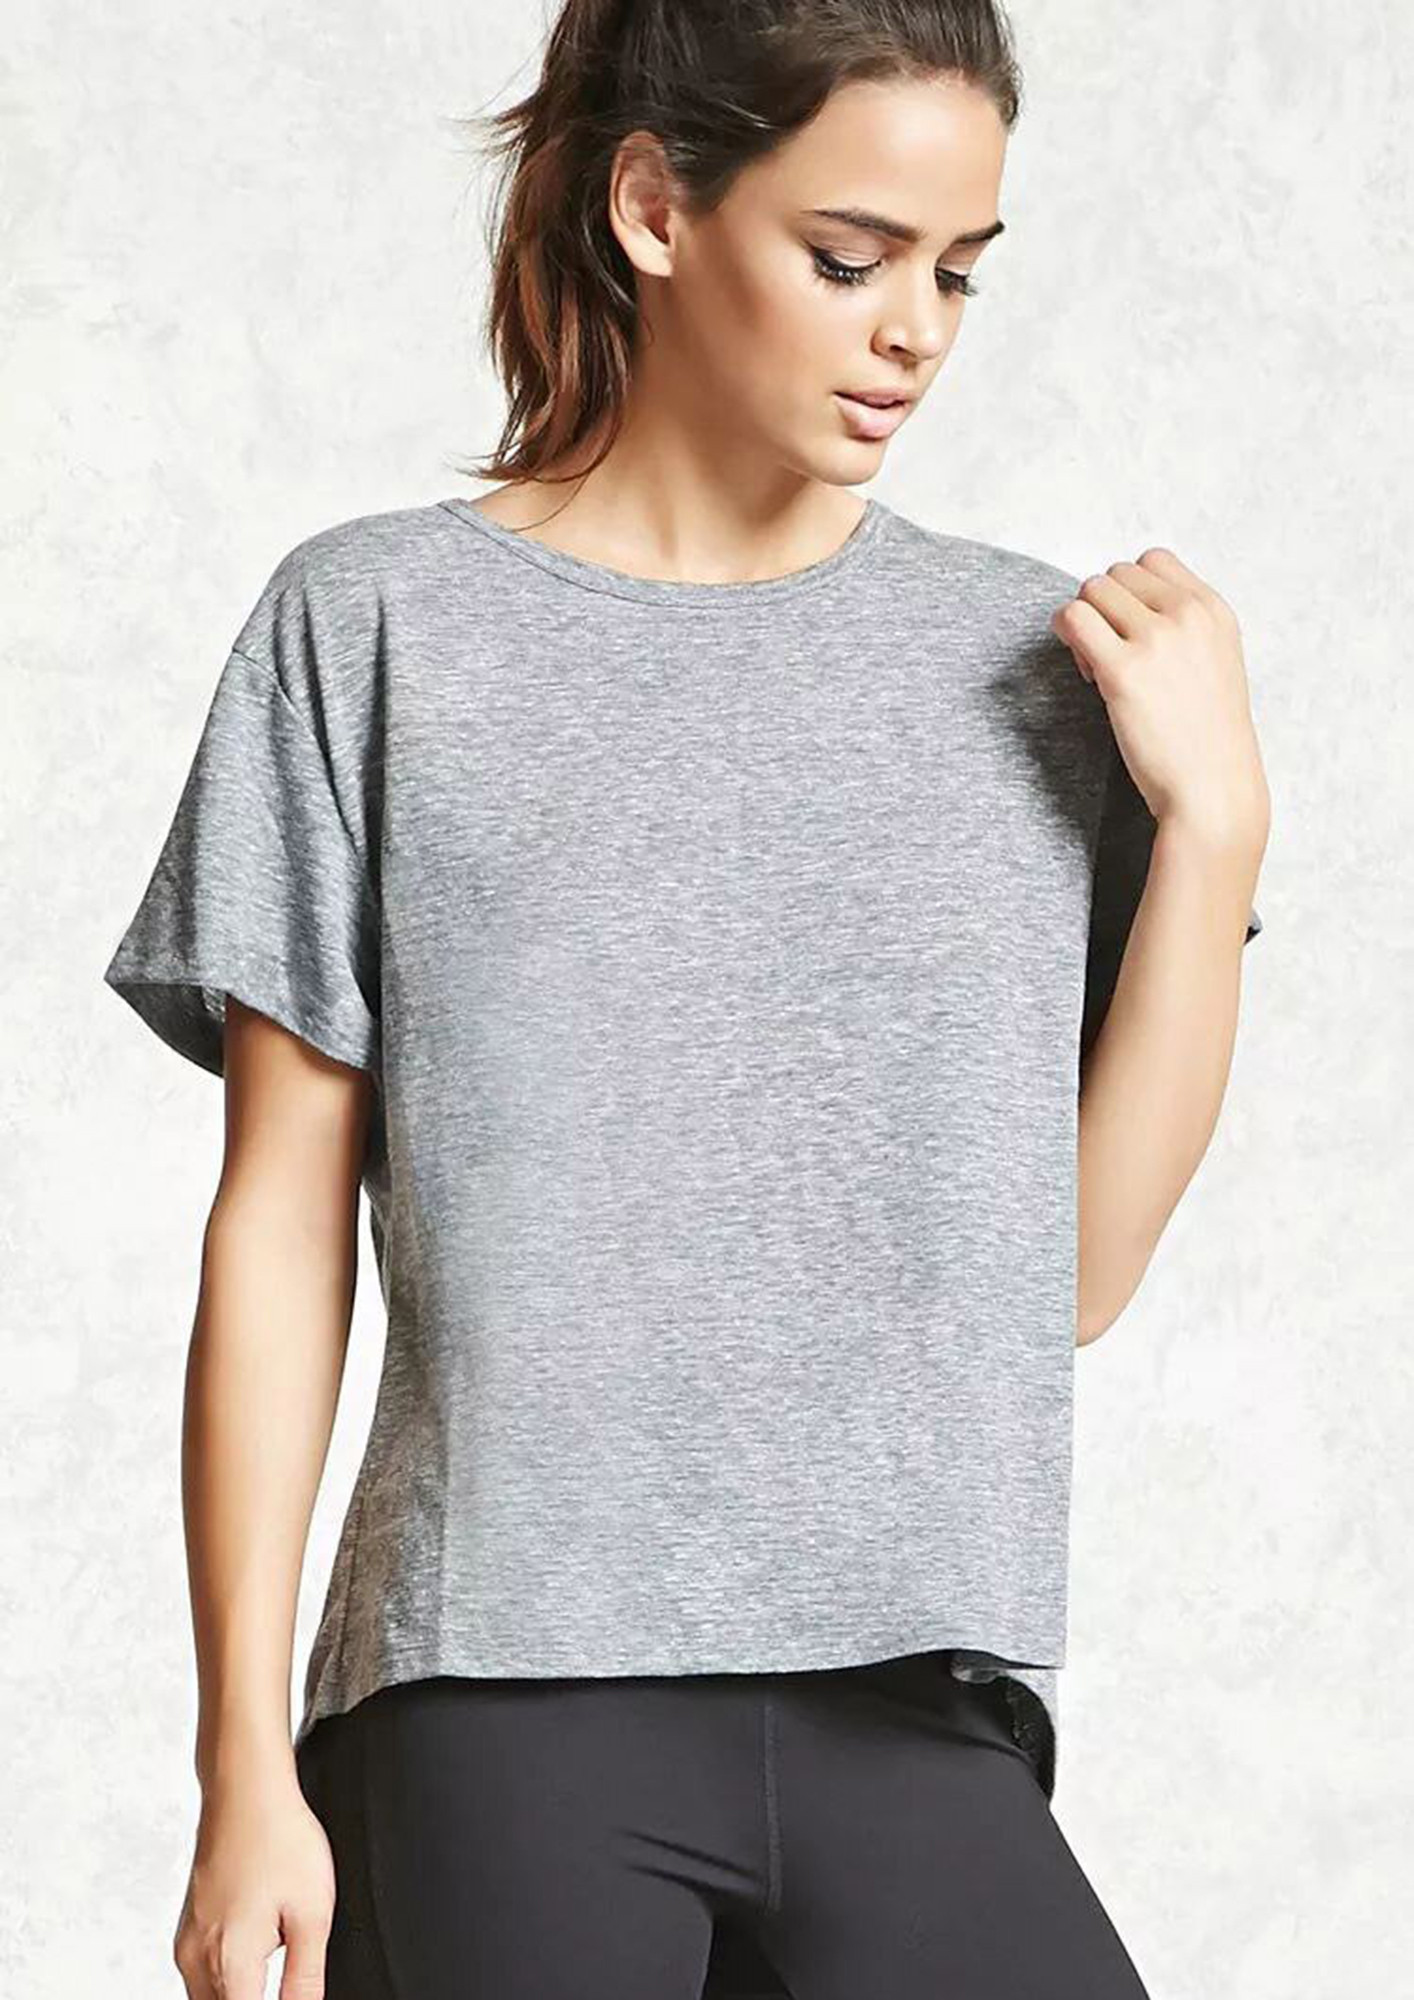 IN A CREW NECK OPEN-BACK GREY T-SHIRT TOP